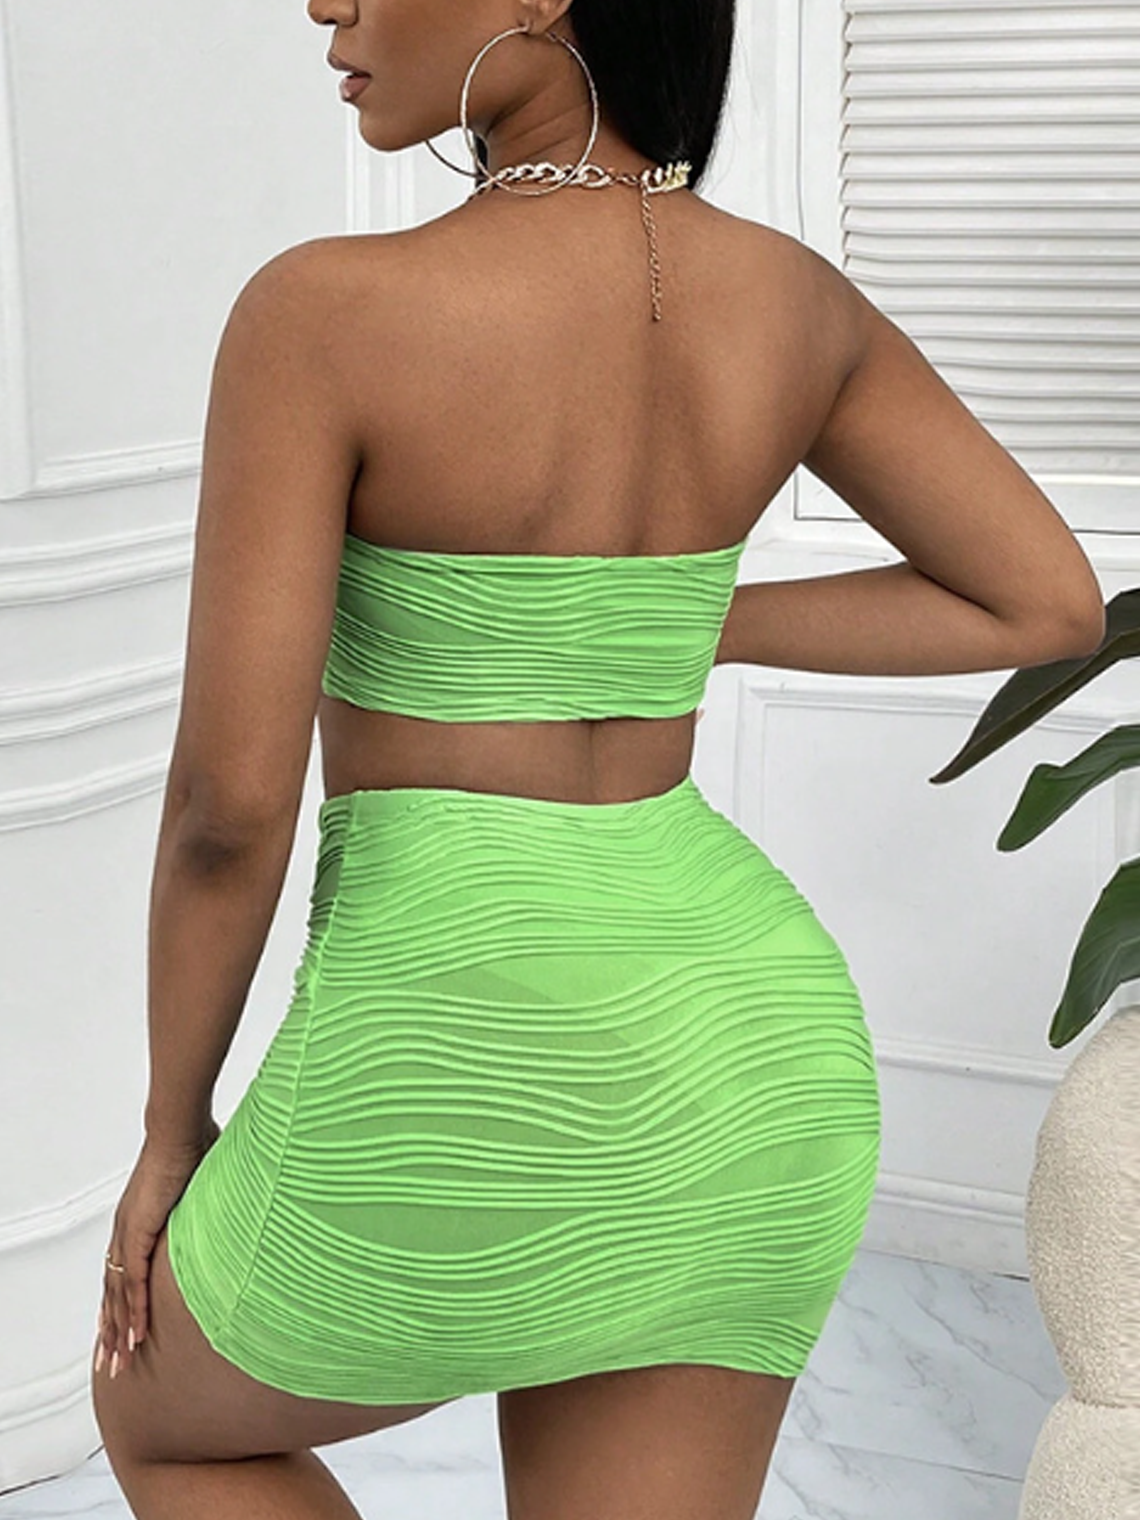 Texture Fabric Plain Tube Top With Skirt Two-Piece Set